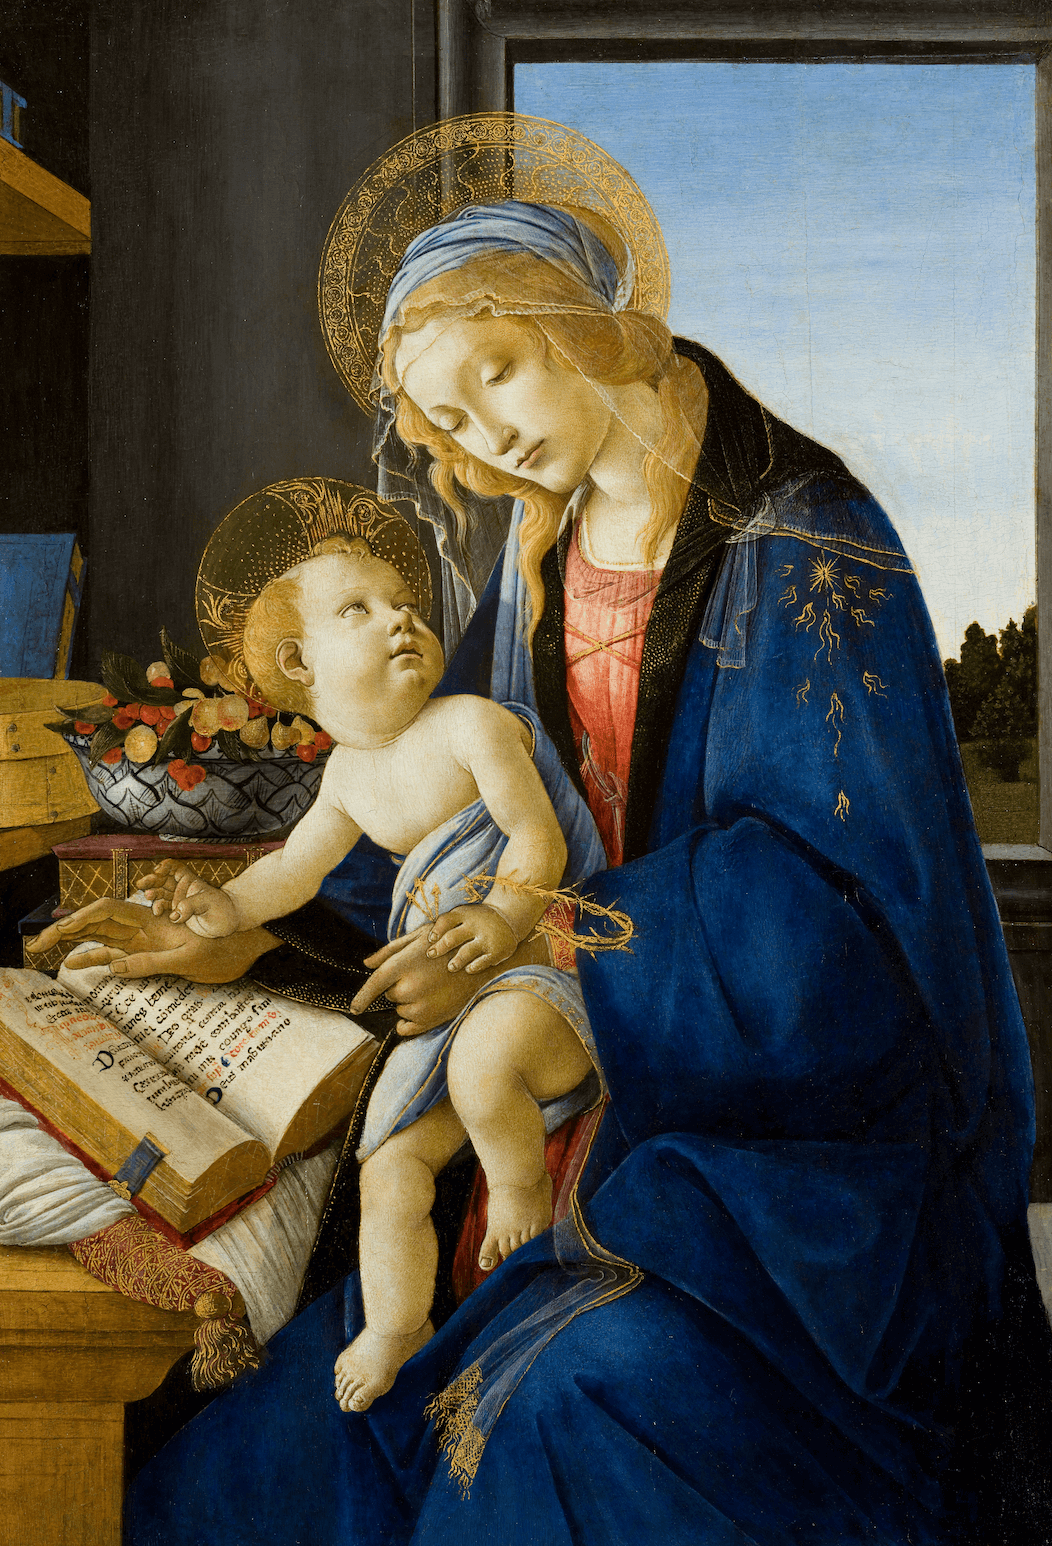 “The Virgin and Child,” another portrait of the Madonna and infant Christ by Botticelli